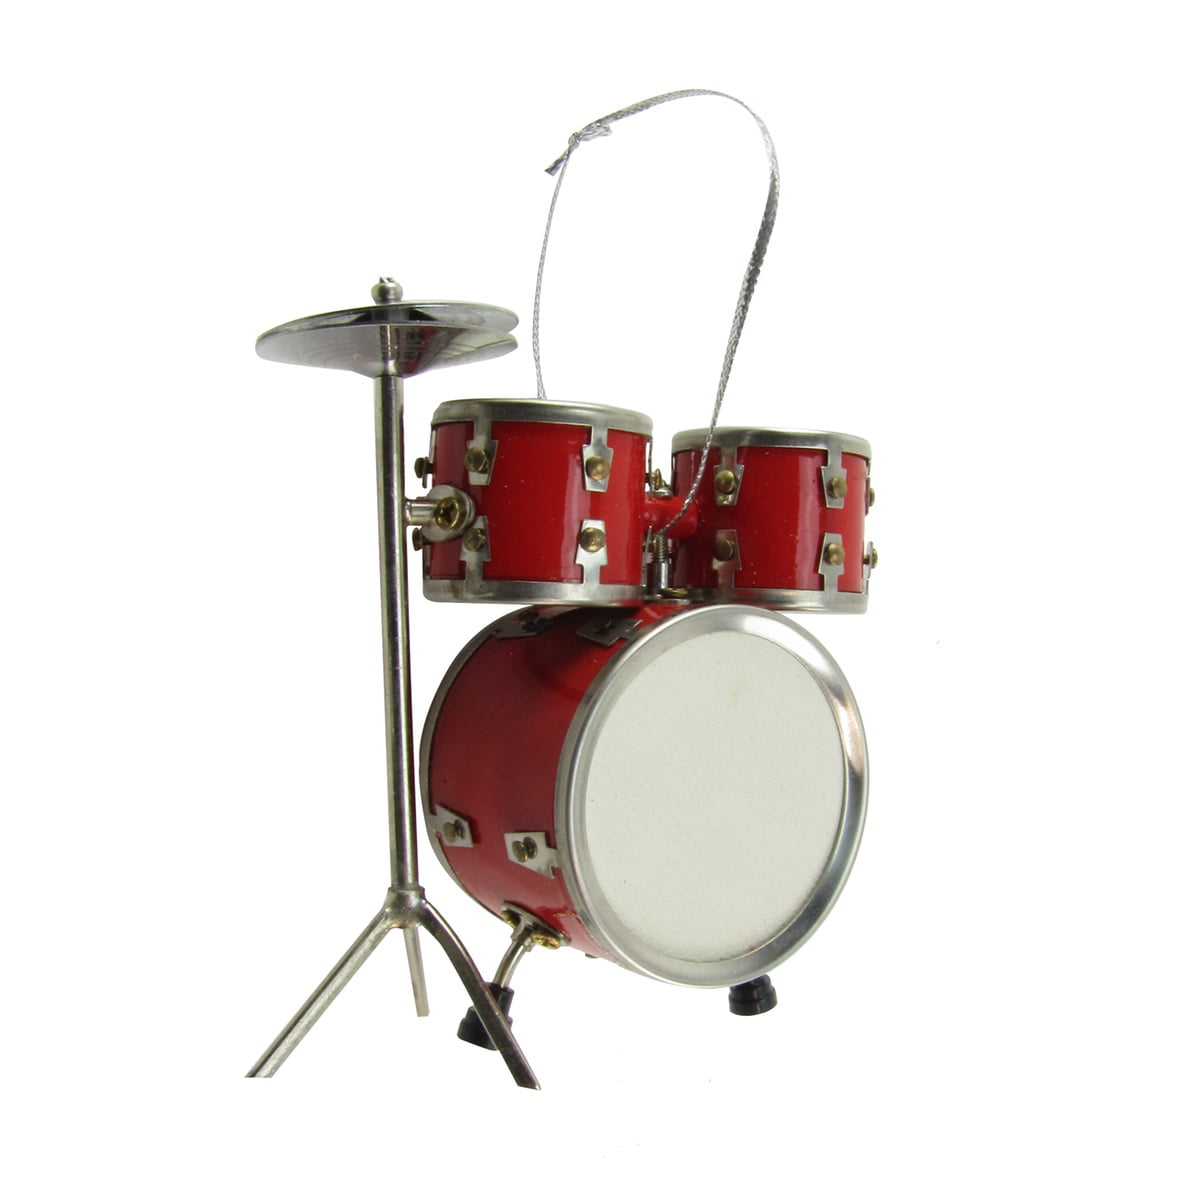 3.393.152.32in Miniature Musical Instrument Model Replica Drum Set Ornament Drummer Gift Home Decor with Box 